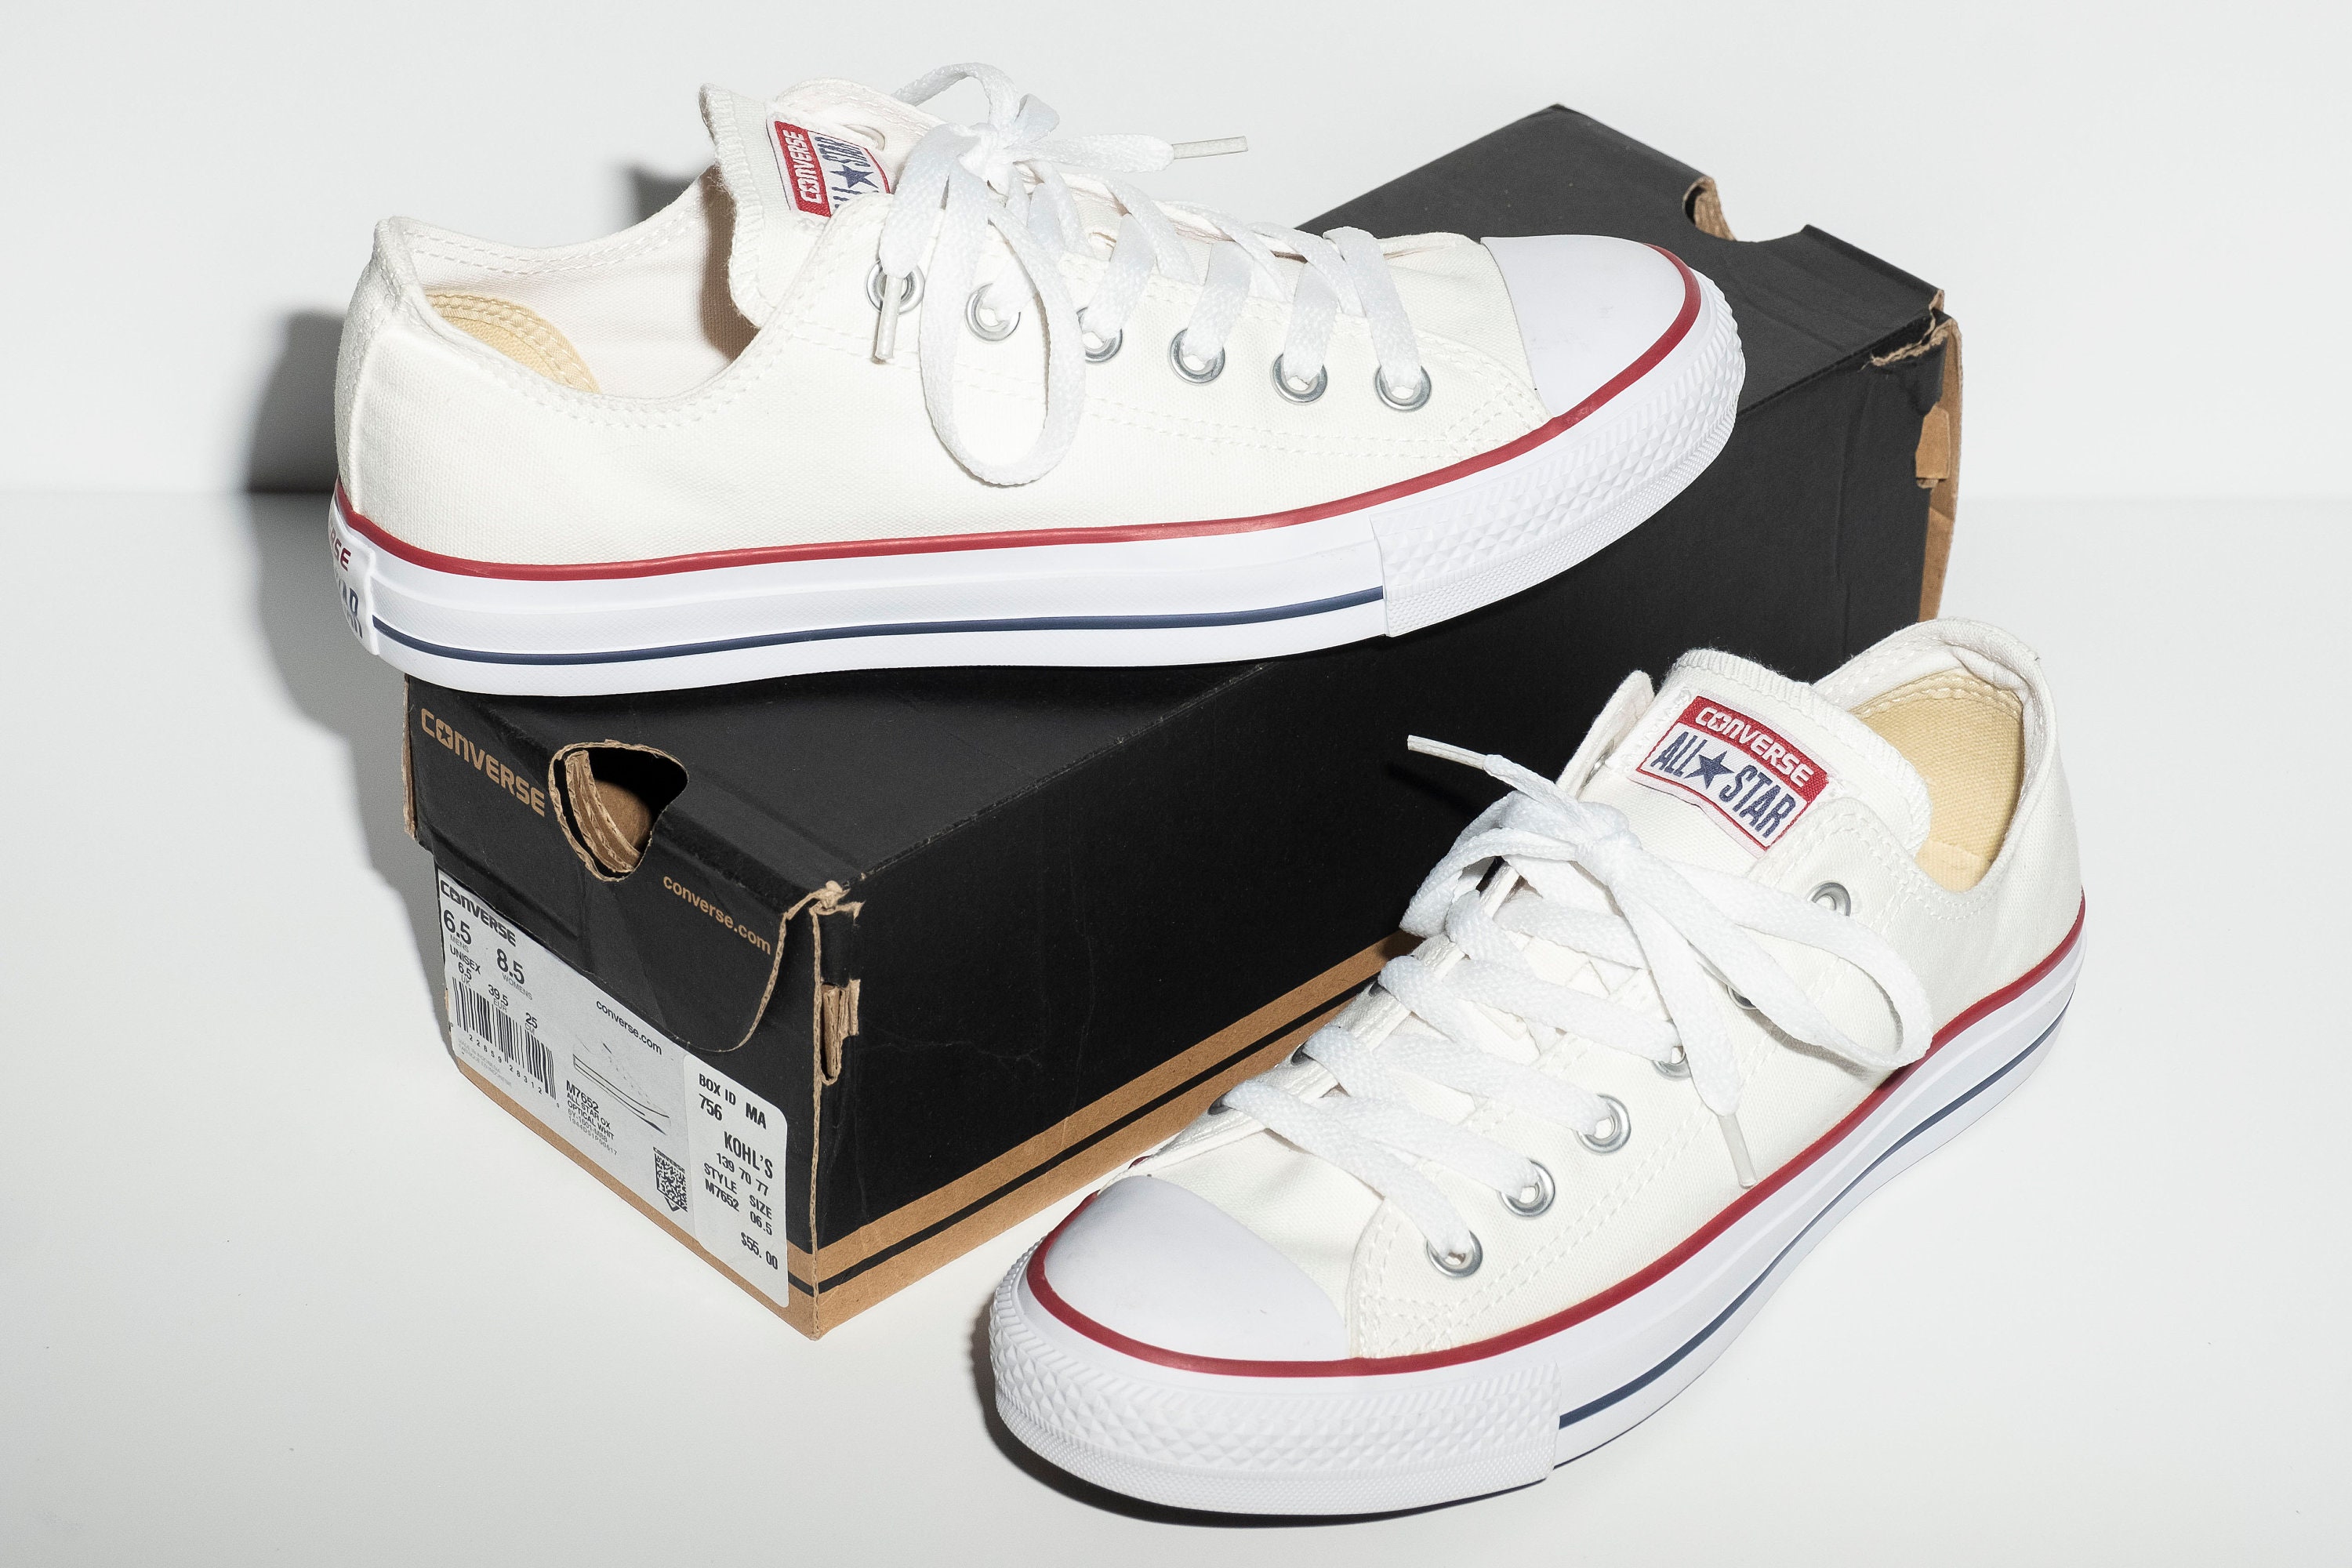 NEW in Box Old School Converse All Star Low Top Chuck Taylor - Etsy